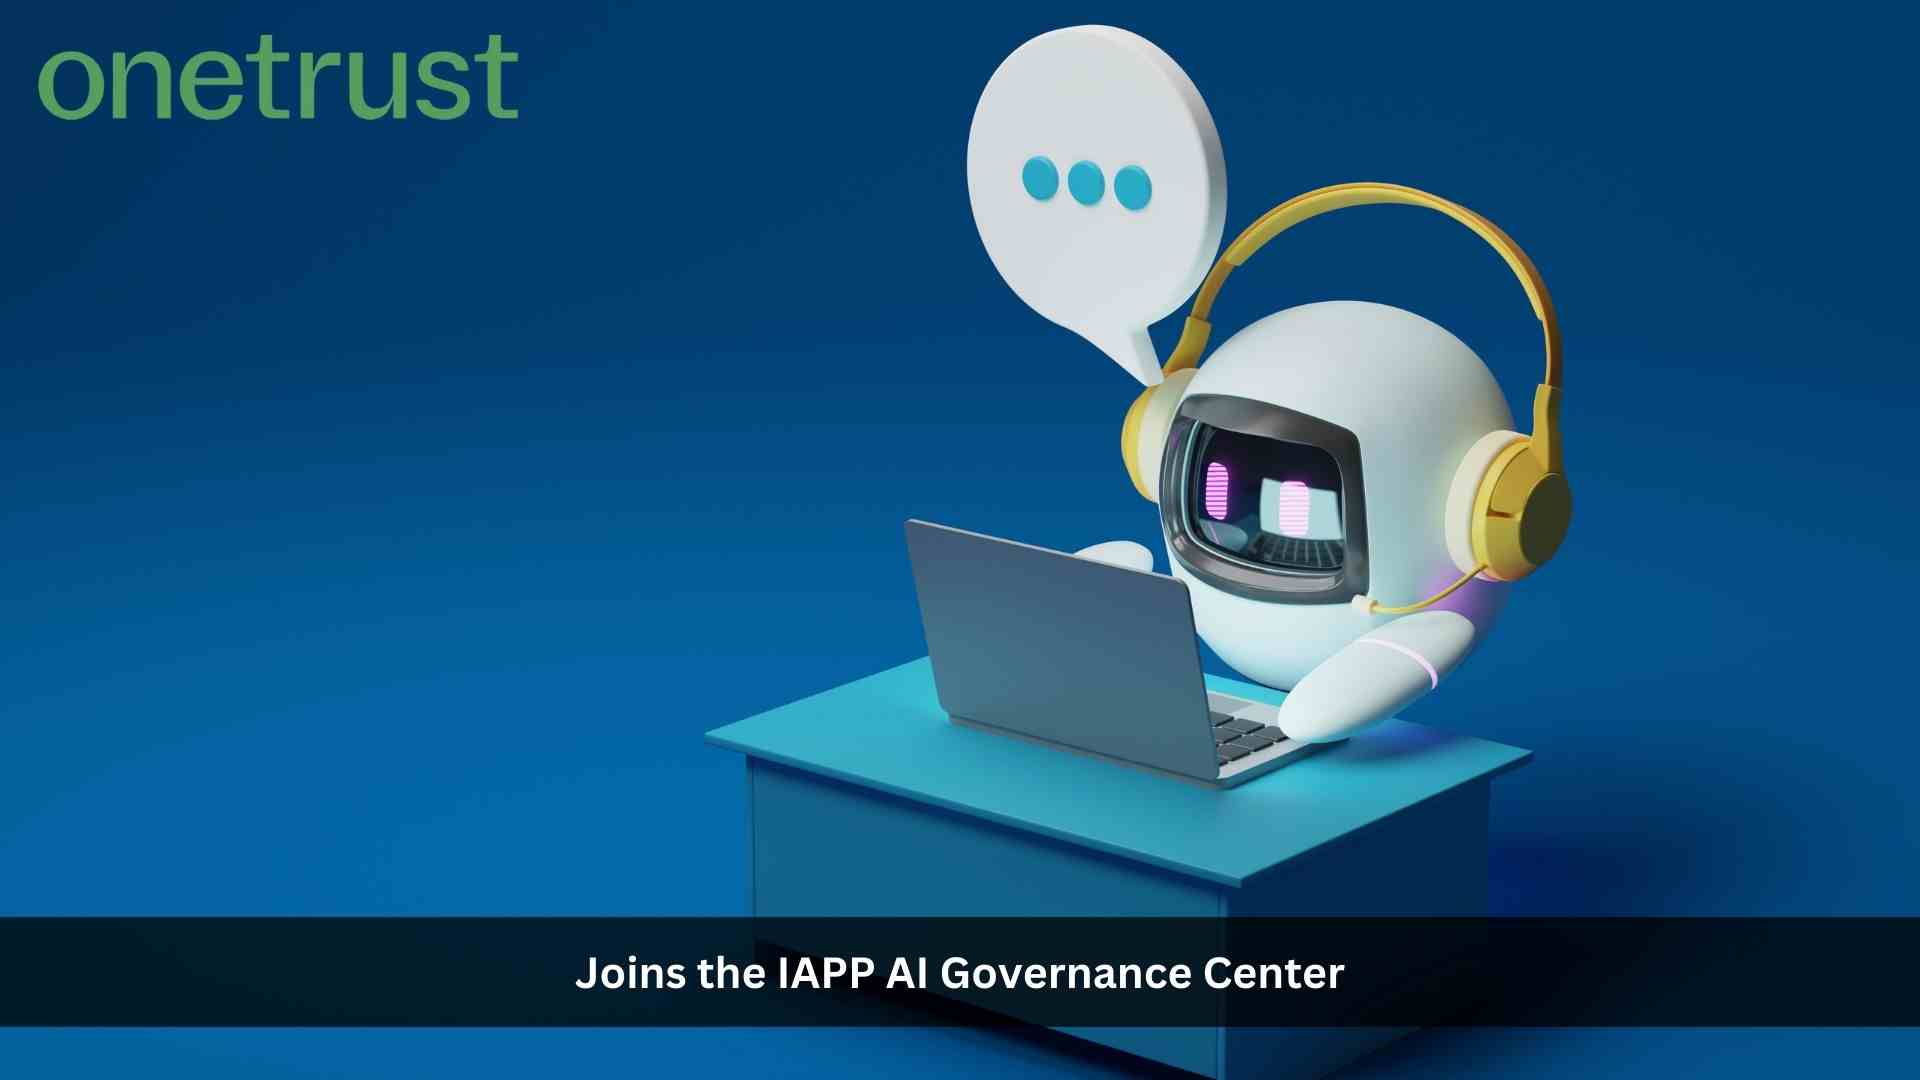 OneTrust Joins the IAPP AI Governance Center to Accelerate Responsible AI Innovation